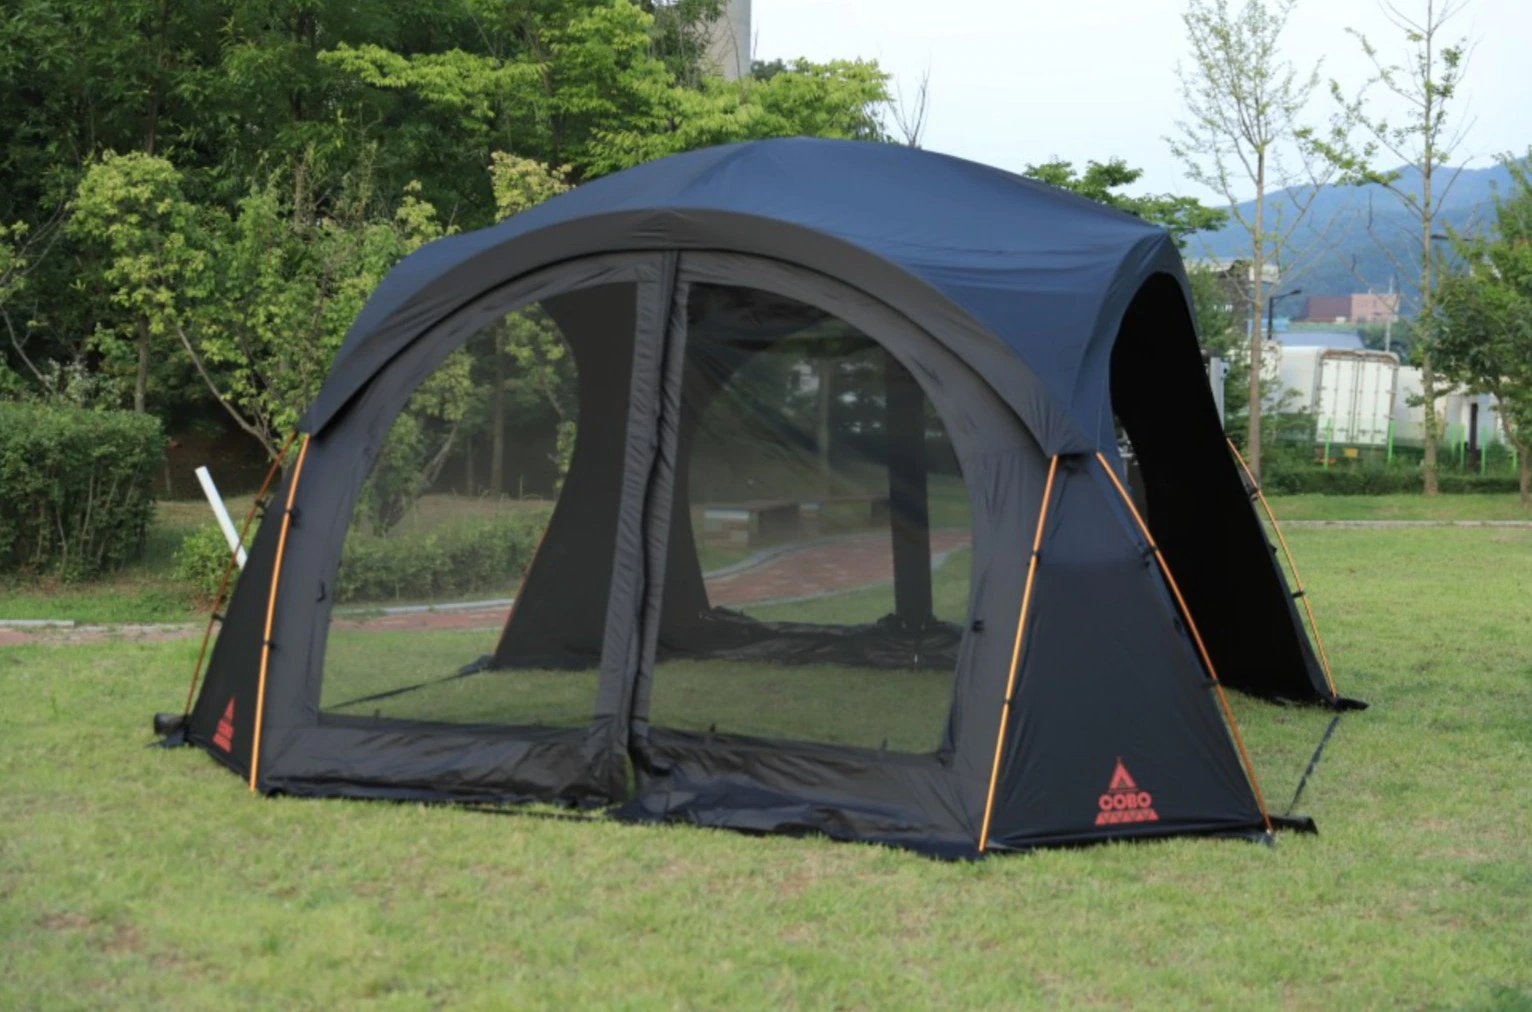 Cheap Goat Tents Outdoor Convenient Folding Octagonal Tent Thickened Awning Camp Outdoor Picnic Rainproof And Mosquito Proof Camping Equipment